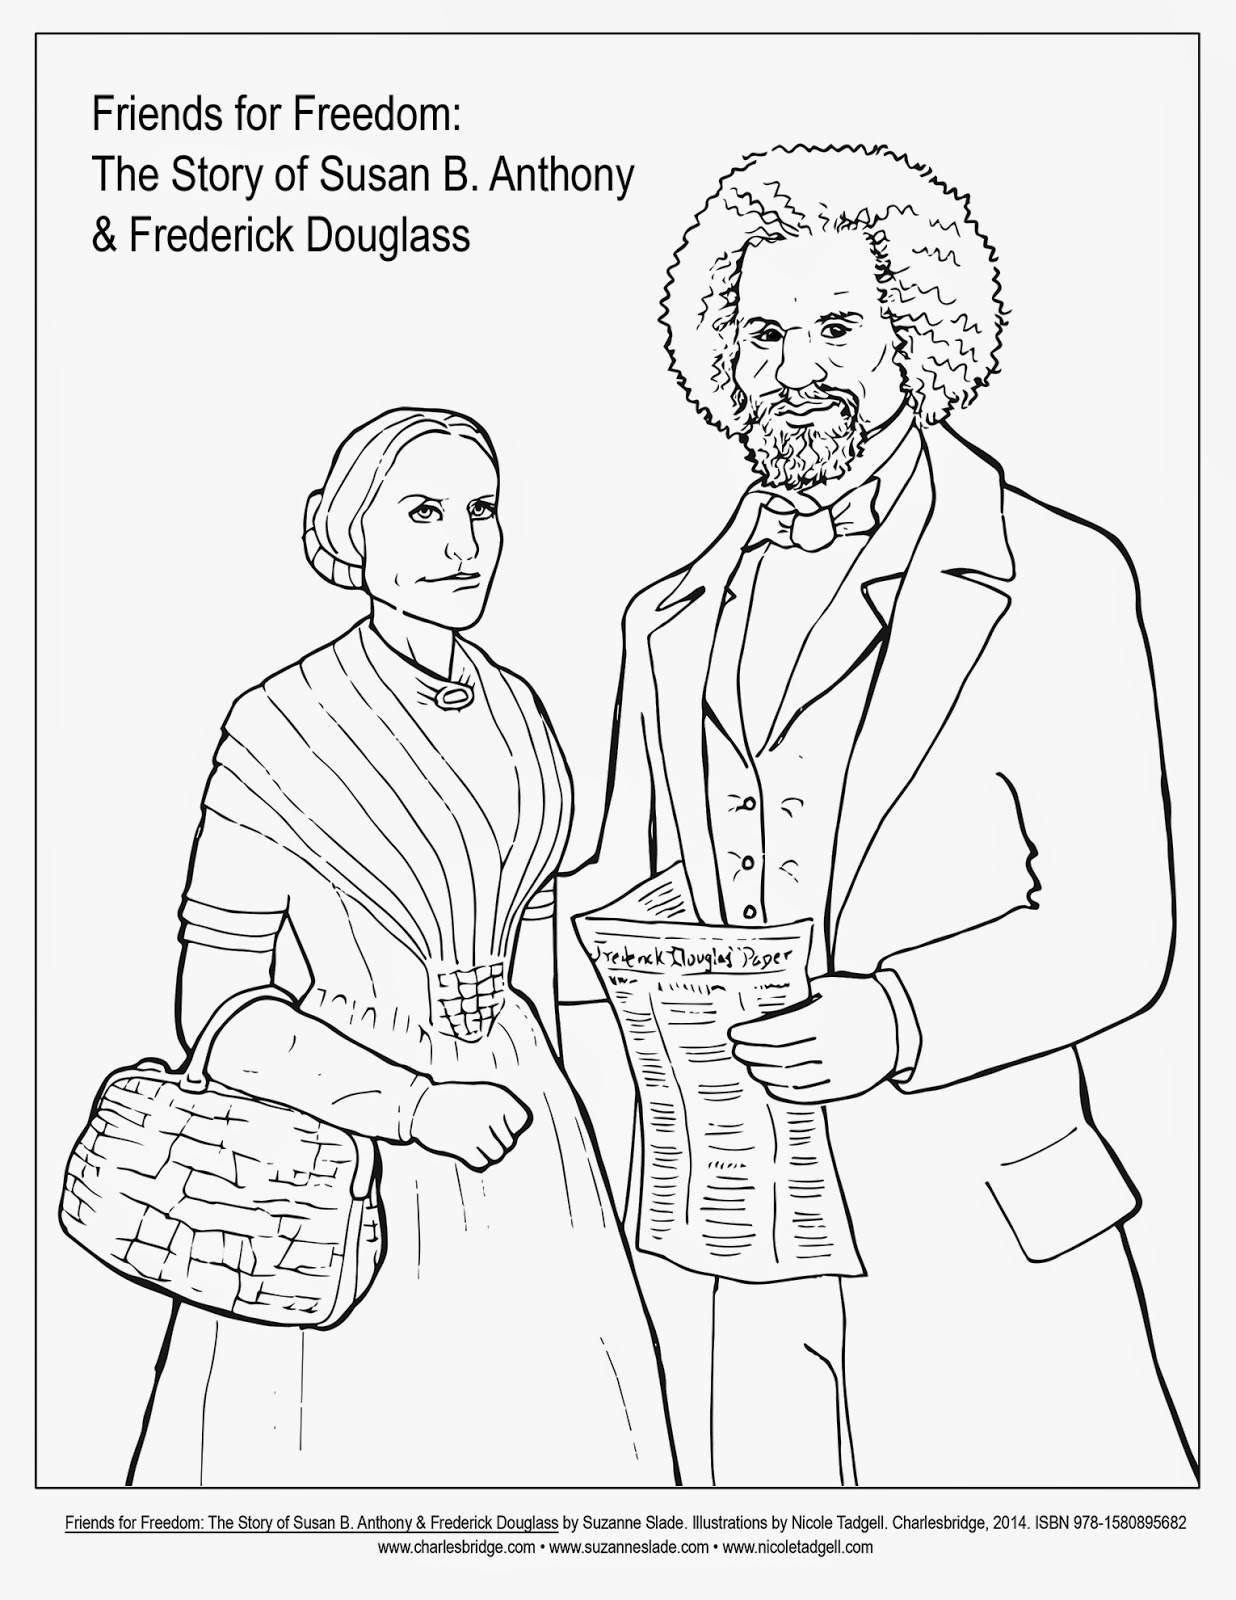 Coloring Pages for Friends for Freedom! » Nicole Tadgell